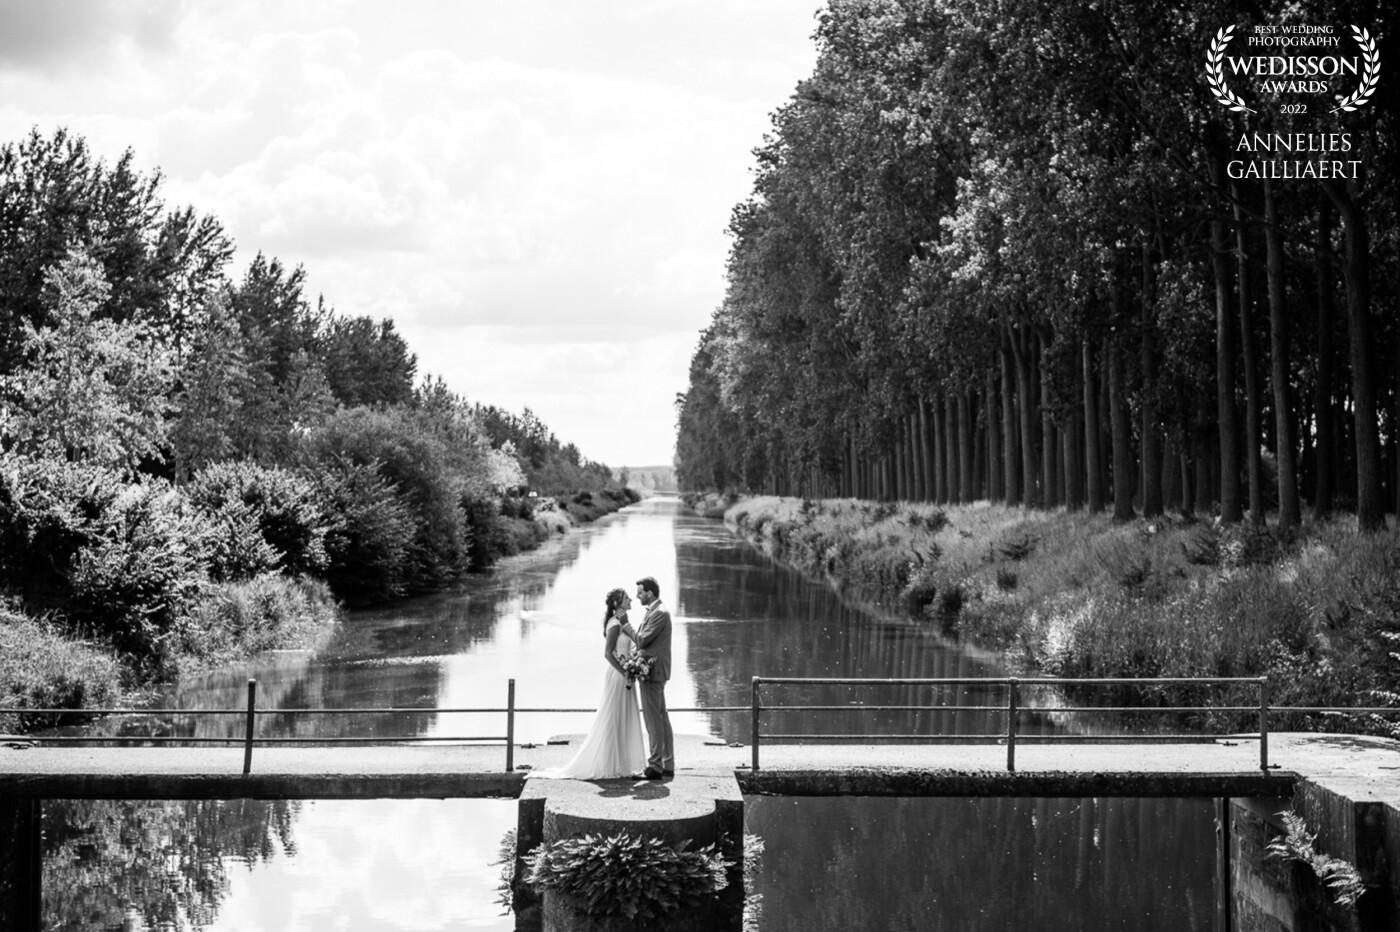 Having a picture in your hometown, is extra special if it's a killer location. The reflection on the water makes the couple stand out even more. The gentle touch of the groom makes the picture complete.